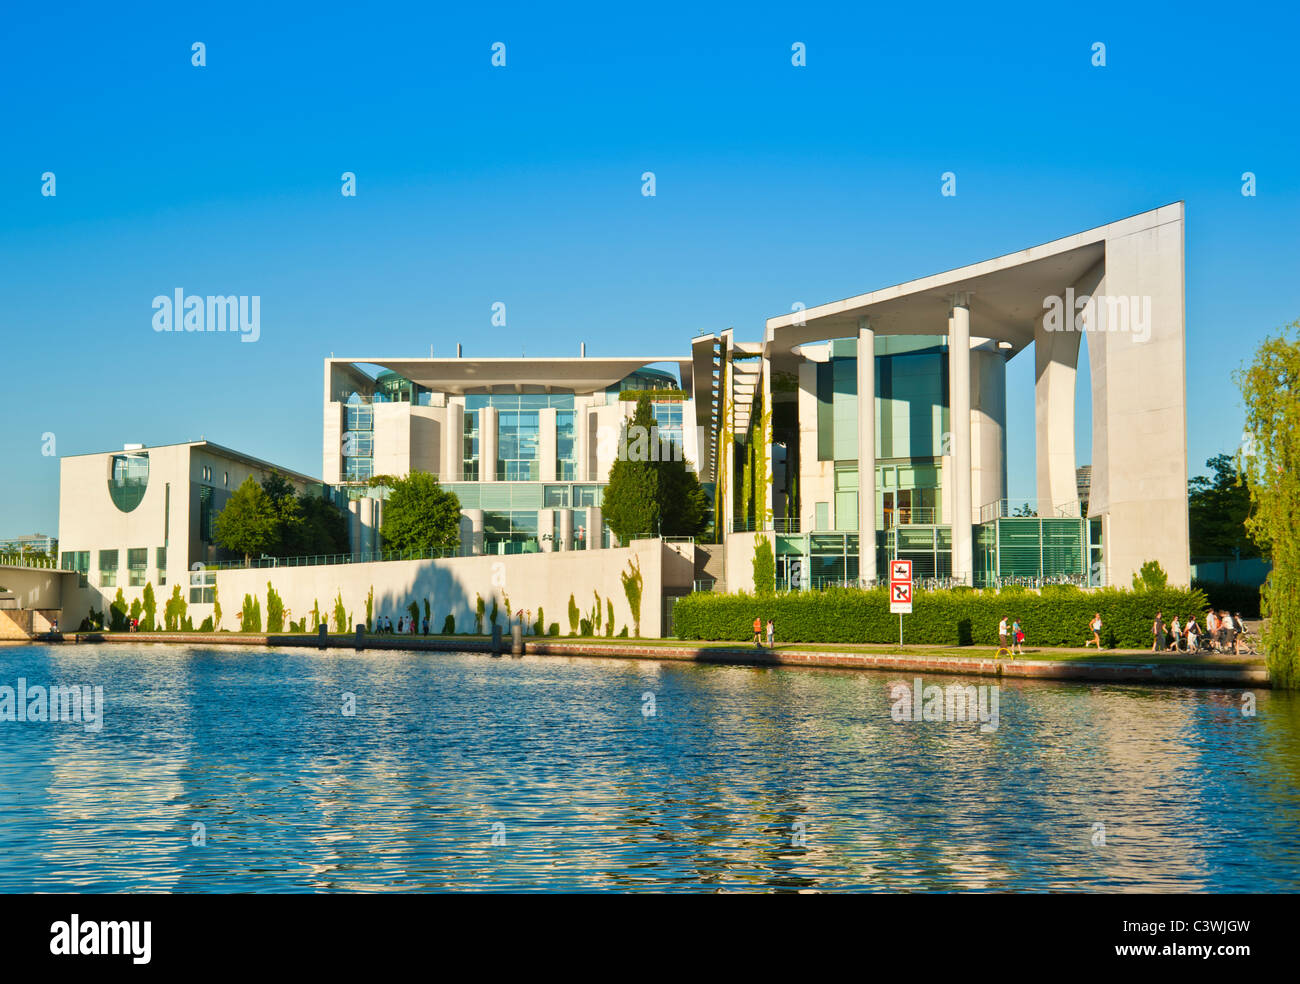 Chancellery, Kanzleramt and Banks of River Spree, Berlin, Germany Stock Photo